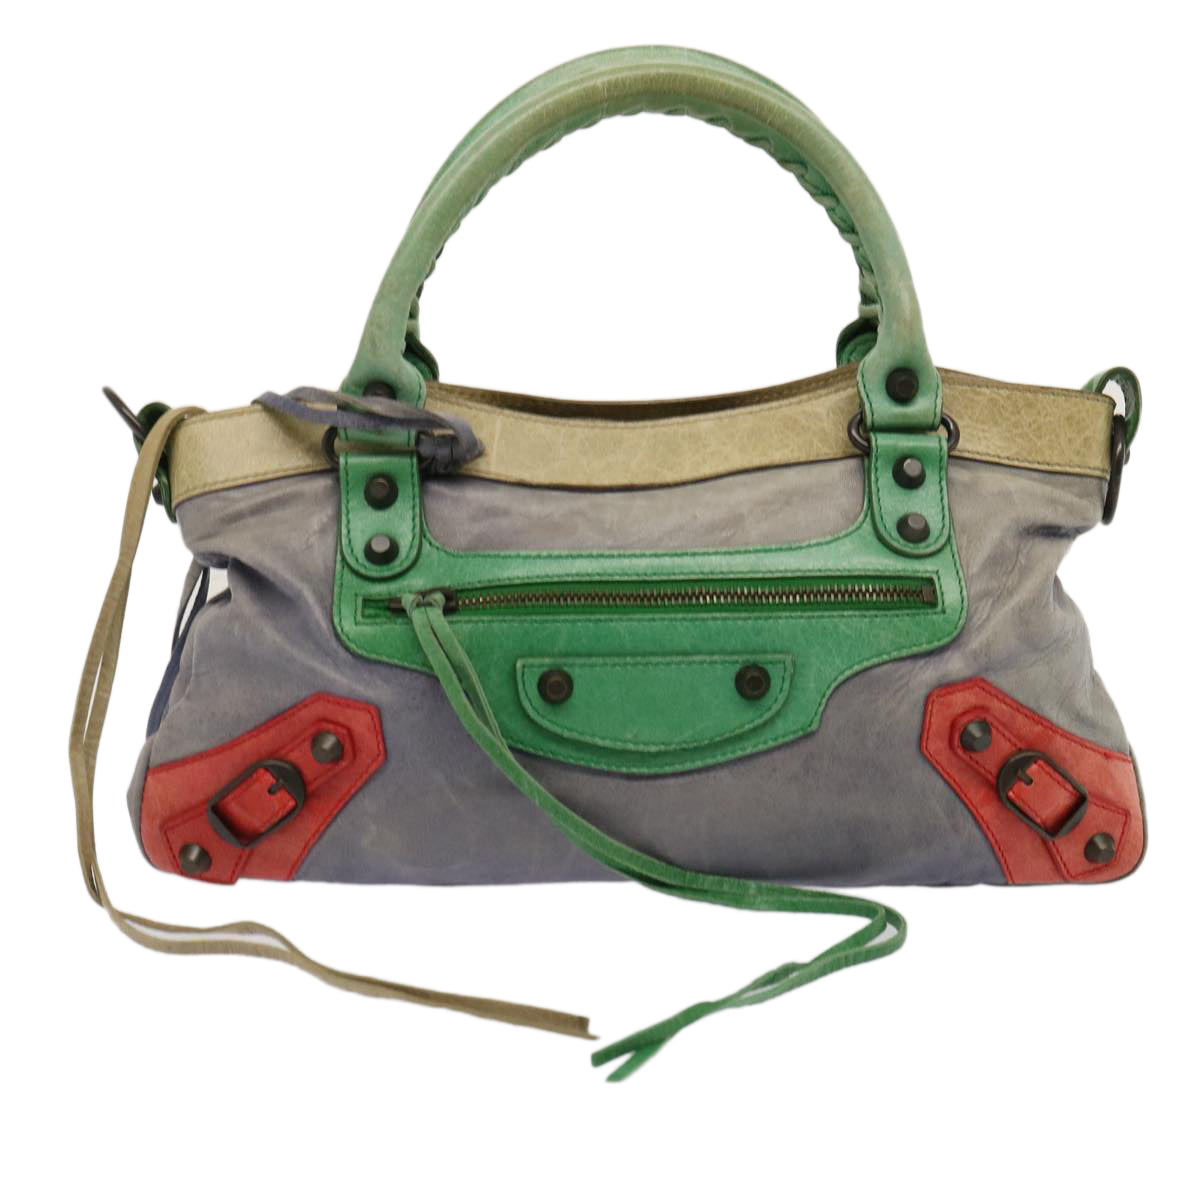 BALENCIAGA The First Hand Bag Leather 2way Purple Green 103208 Auth 73254